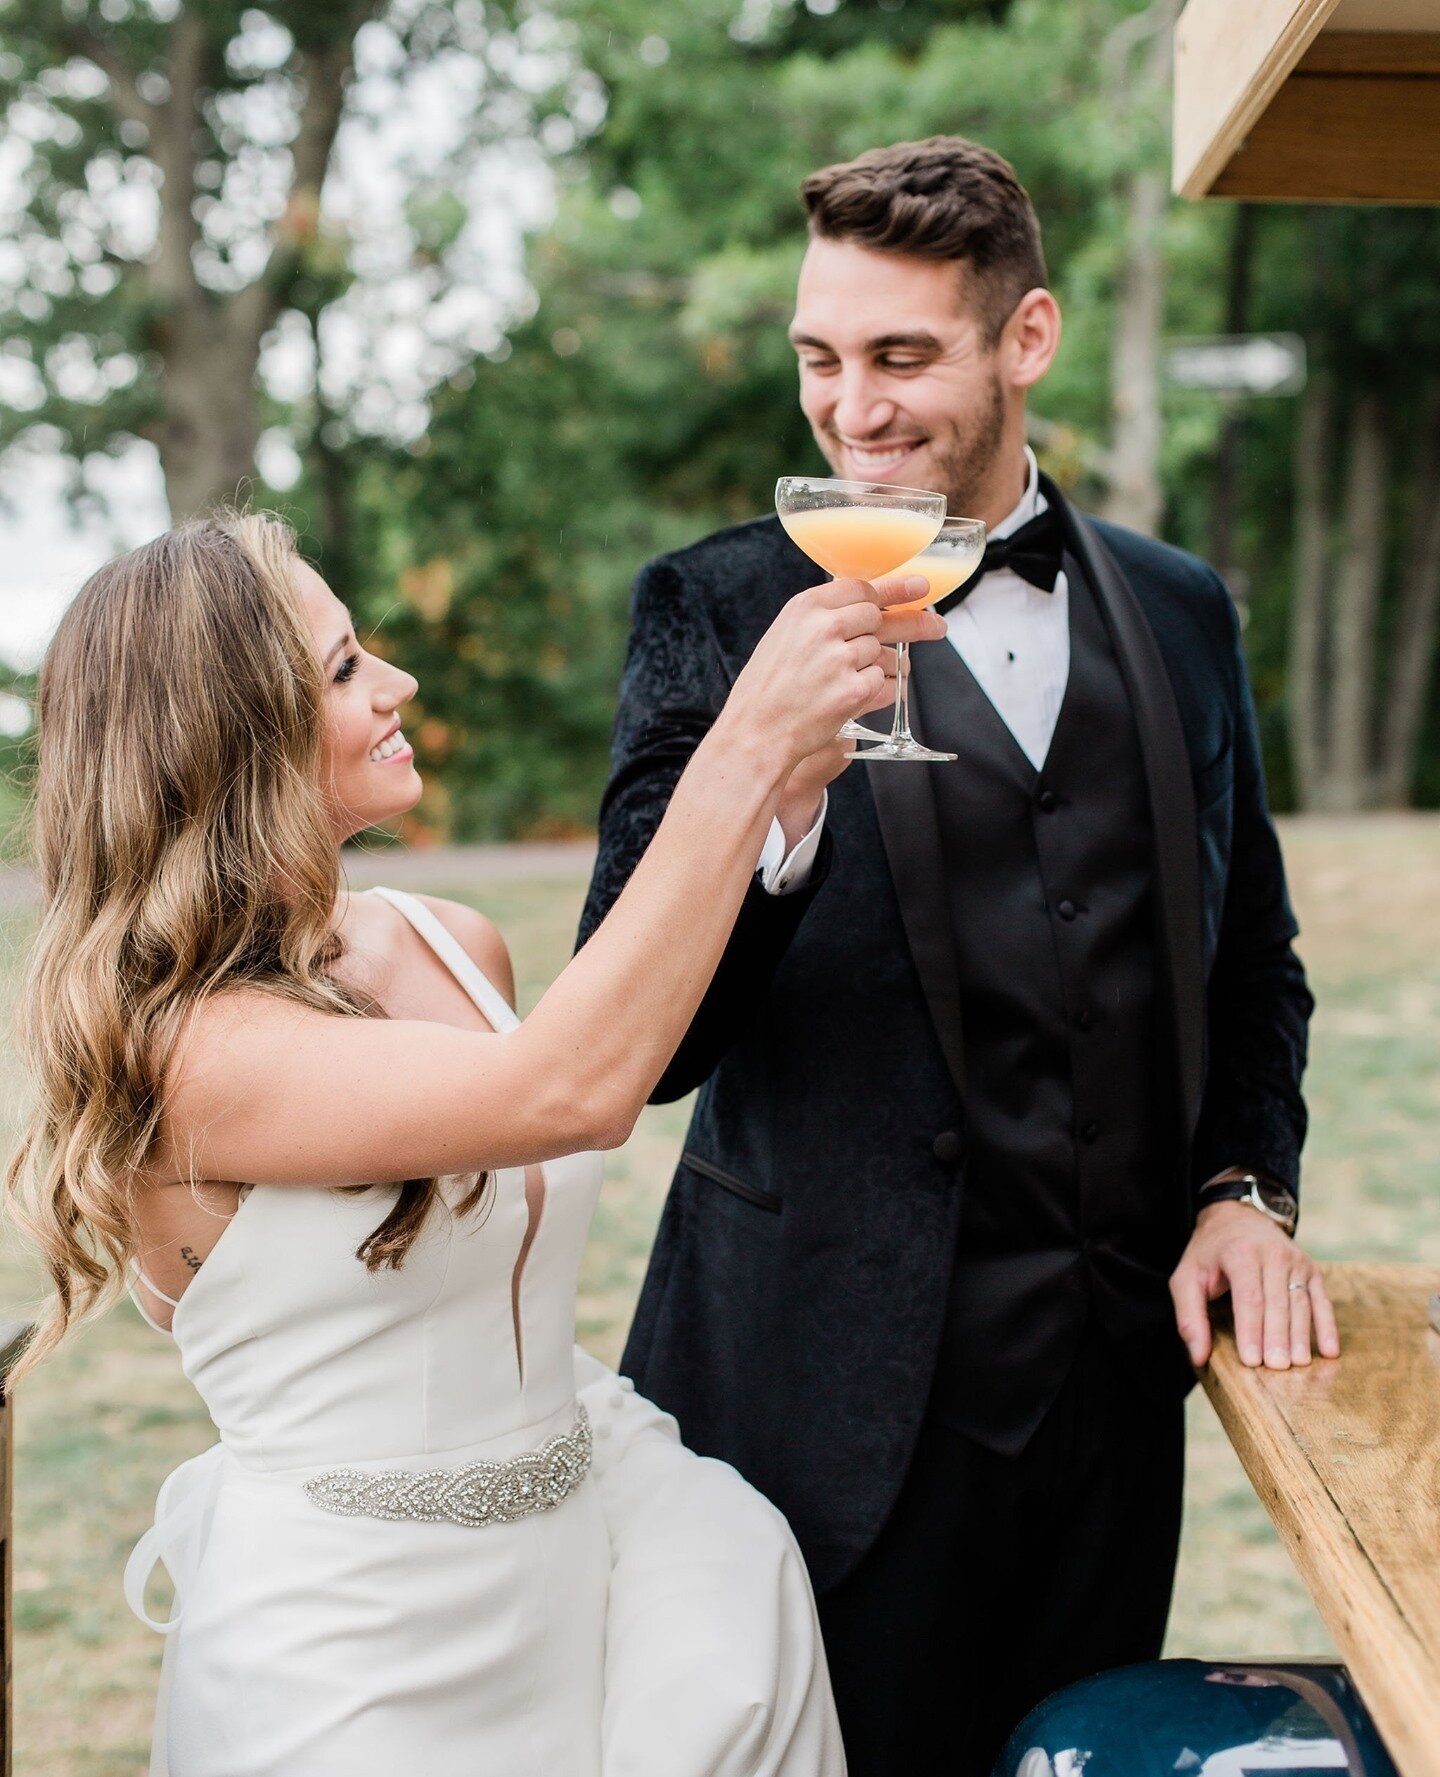 Cheers to good times! Looking forward to getting back out there in the warmer weather 😎⁠
-⁠
Photography: @christiannapolitanphoto⁠
Venue: @larzanderson